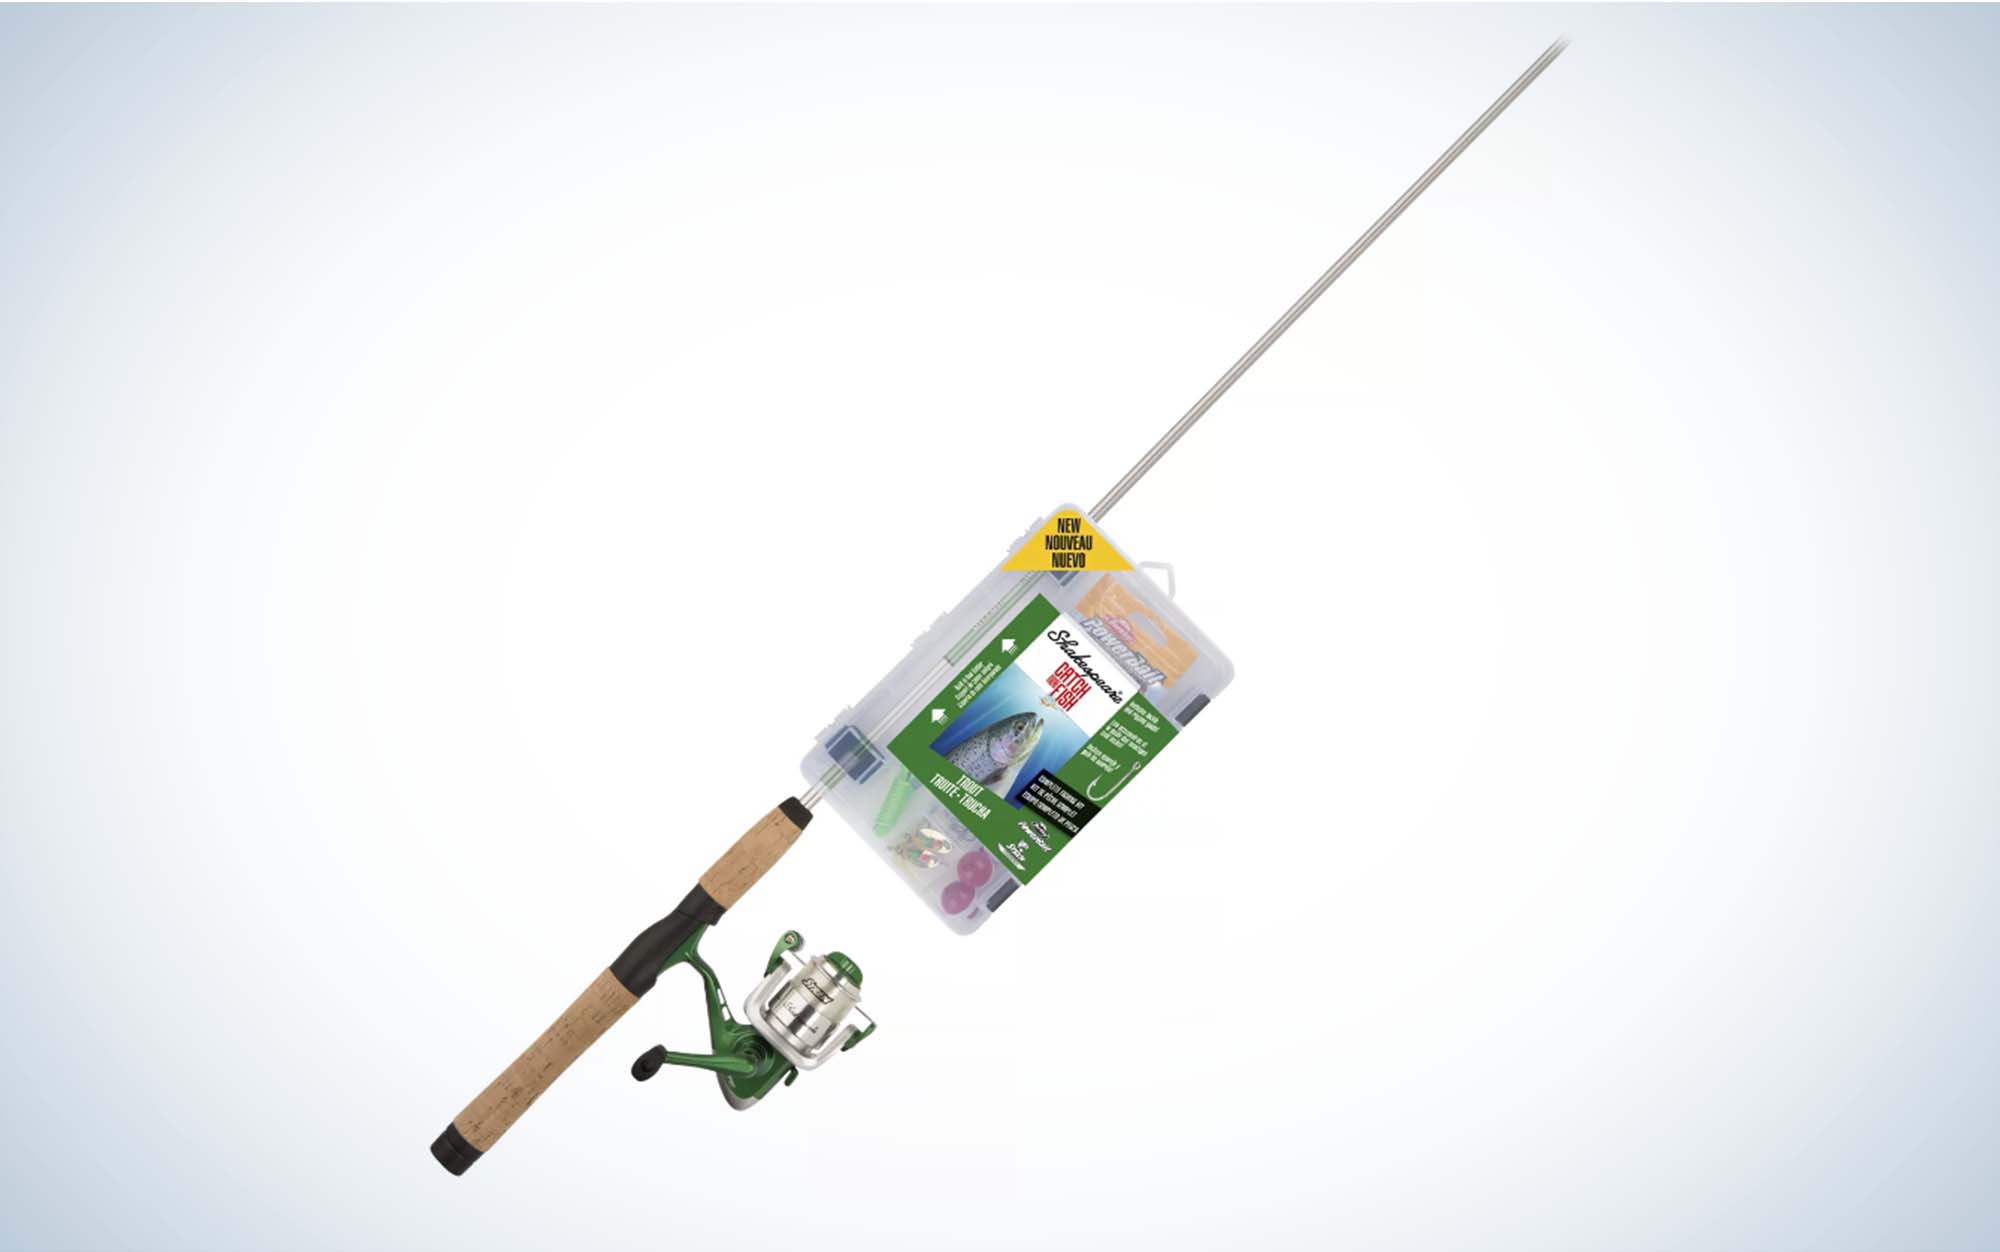 Paul's Discount - Just got more kids fishing poles in!